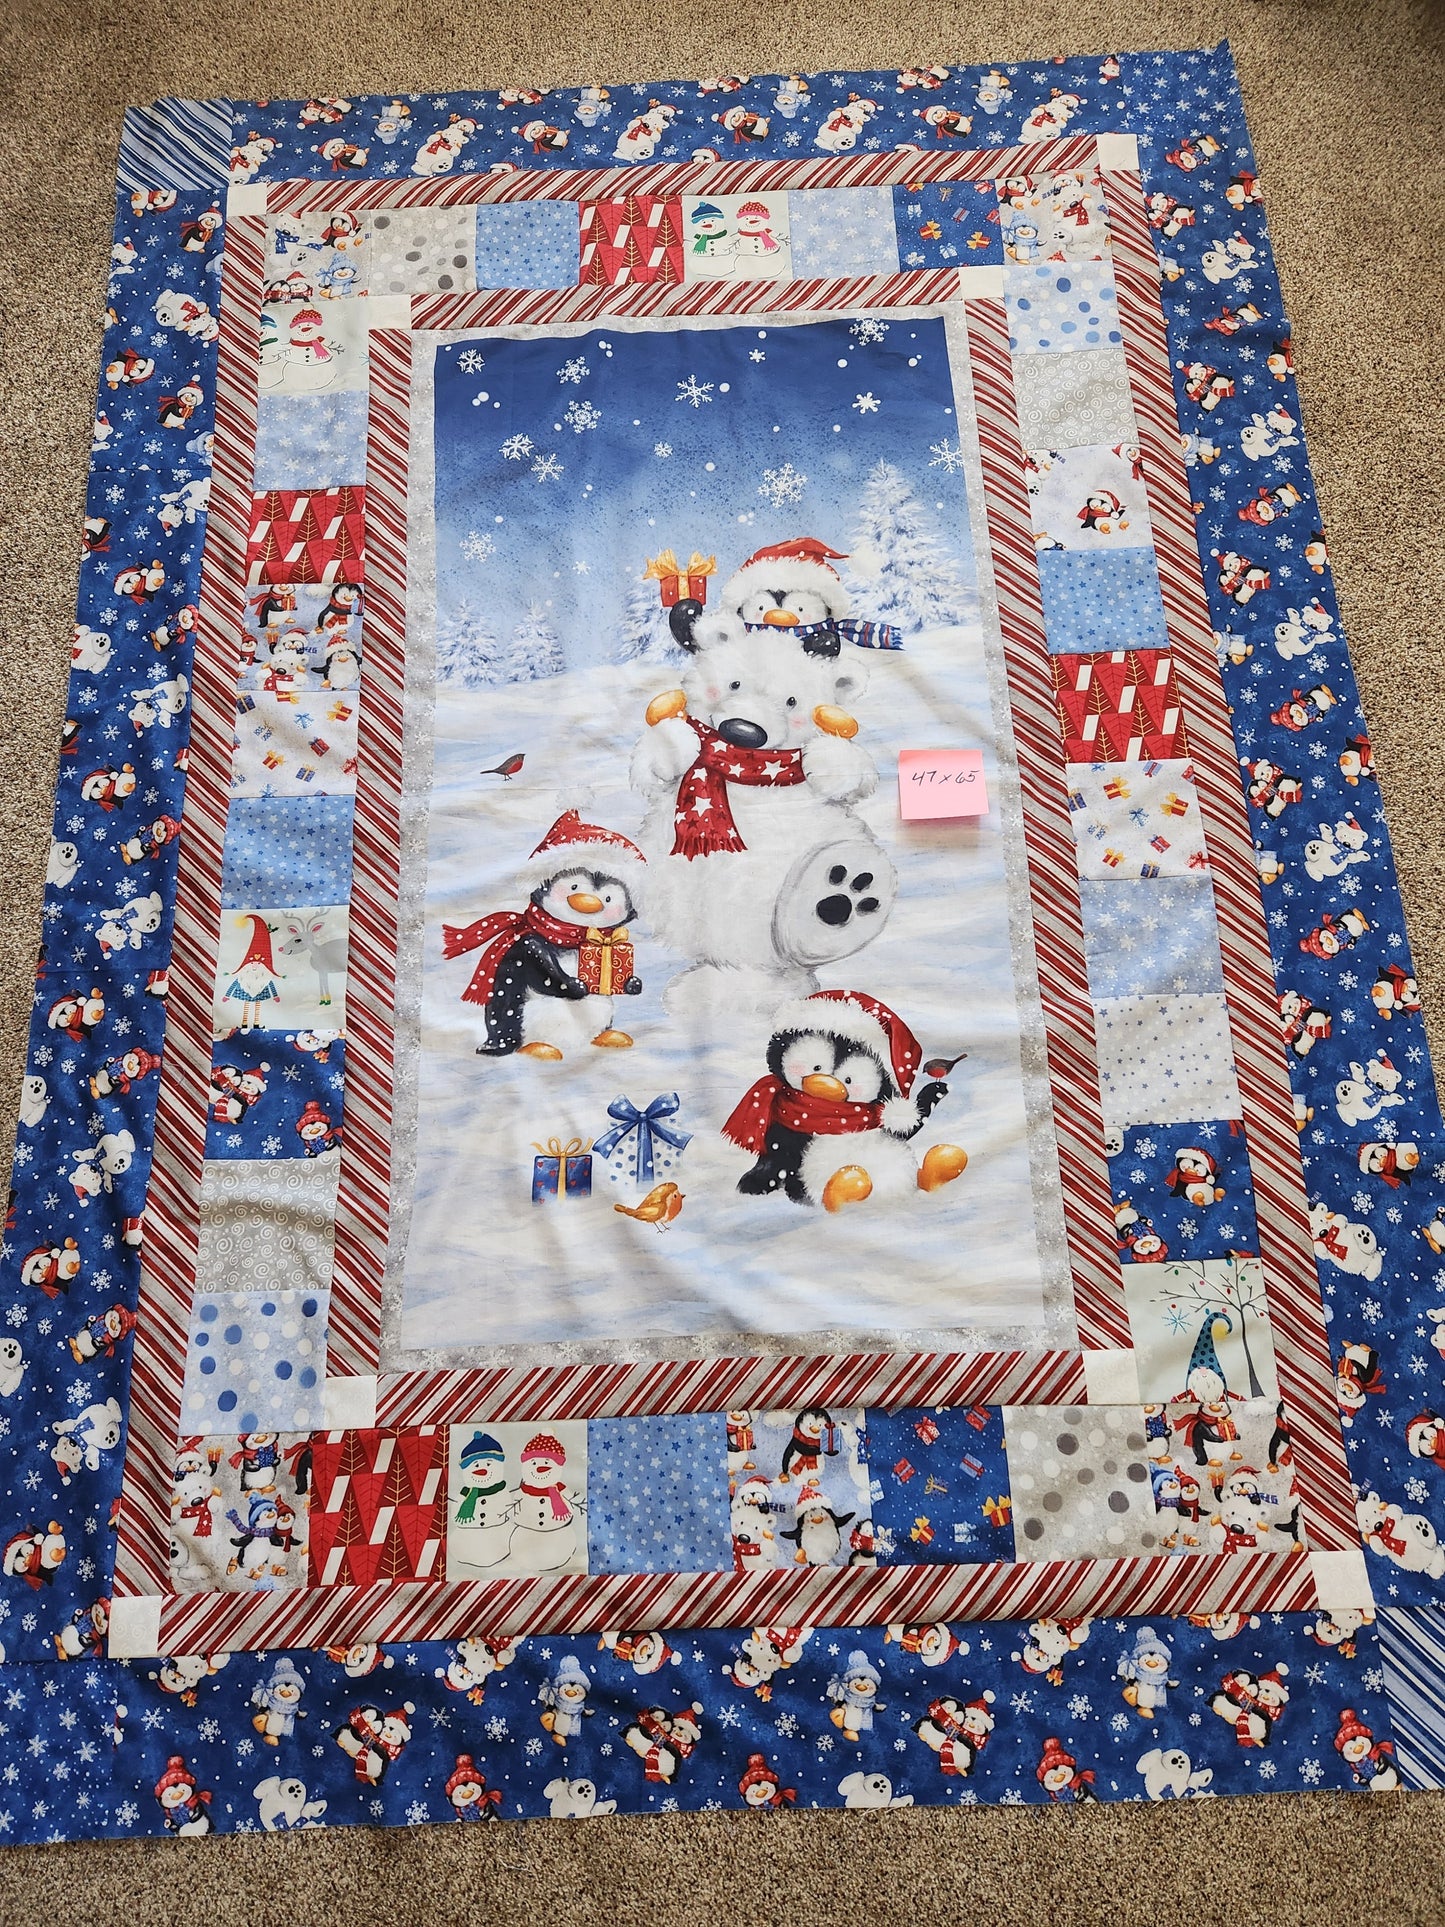 Wilmington Prints Quilt Kit Easy DIY Beginner Christmas Quilt Kit for Holiday Quilt includes PRECUT squares and yardage fabrics to cut strips and binding Snow What Fun Picture This Pattern